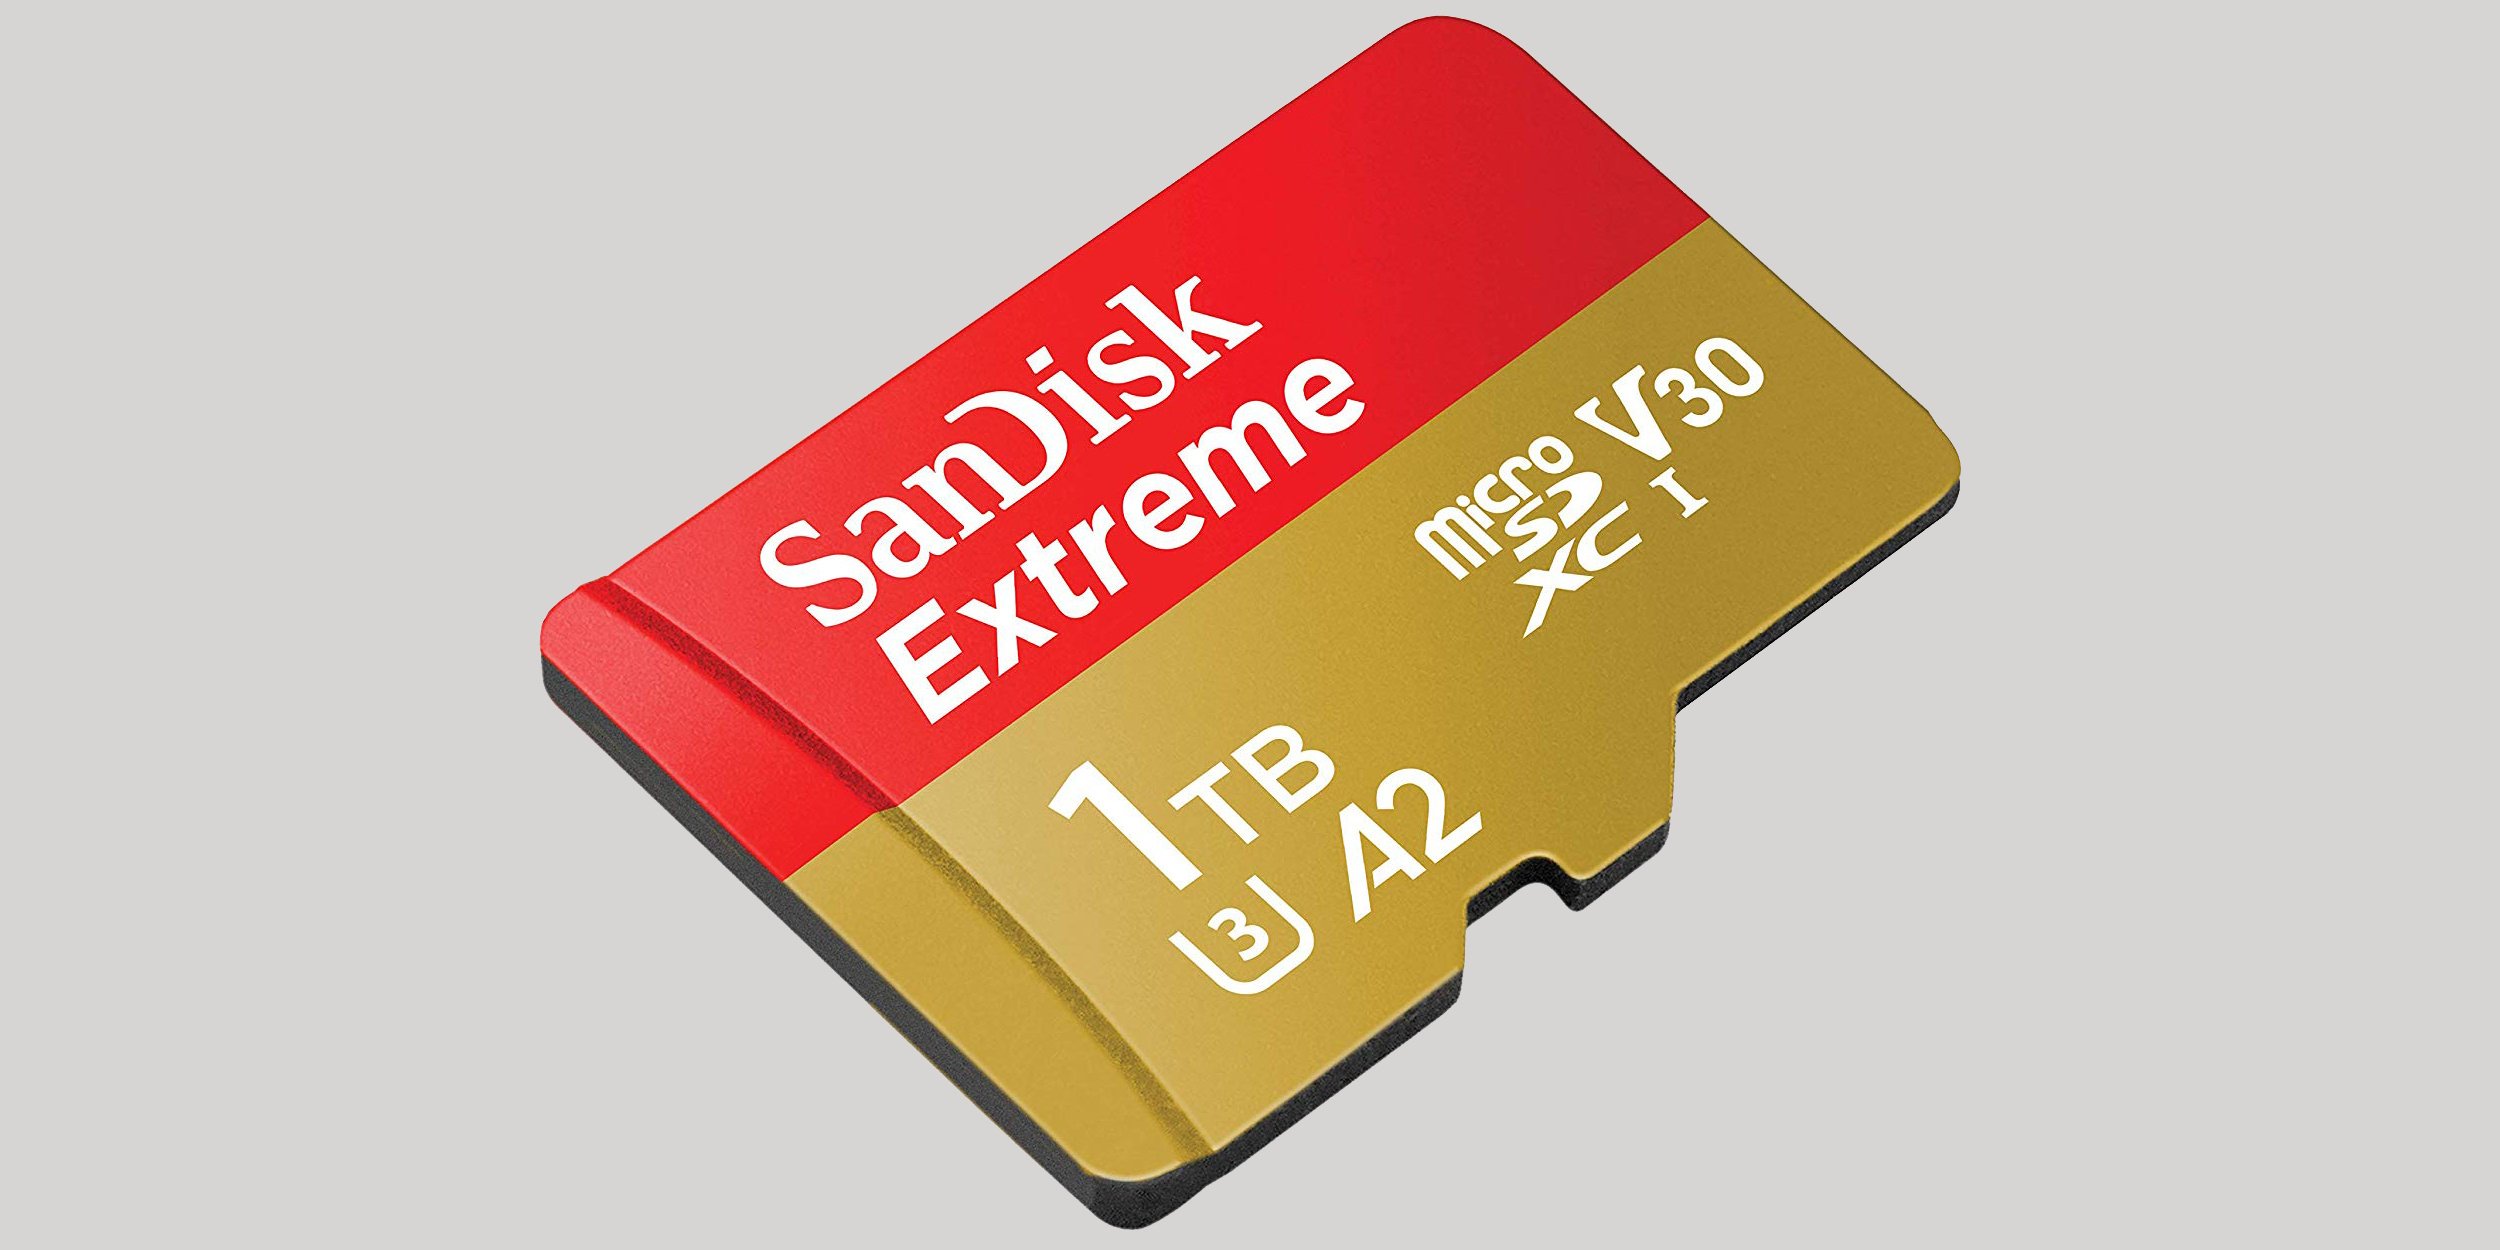 sd cards compatible with switch